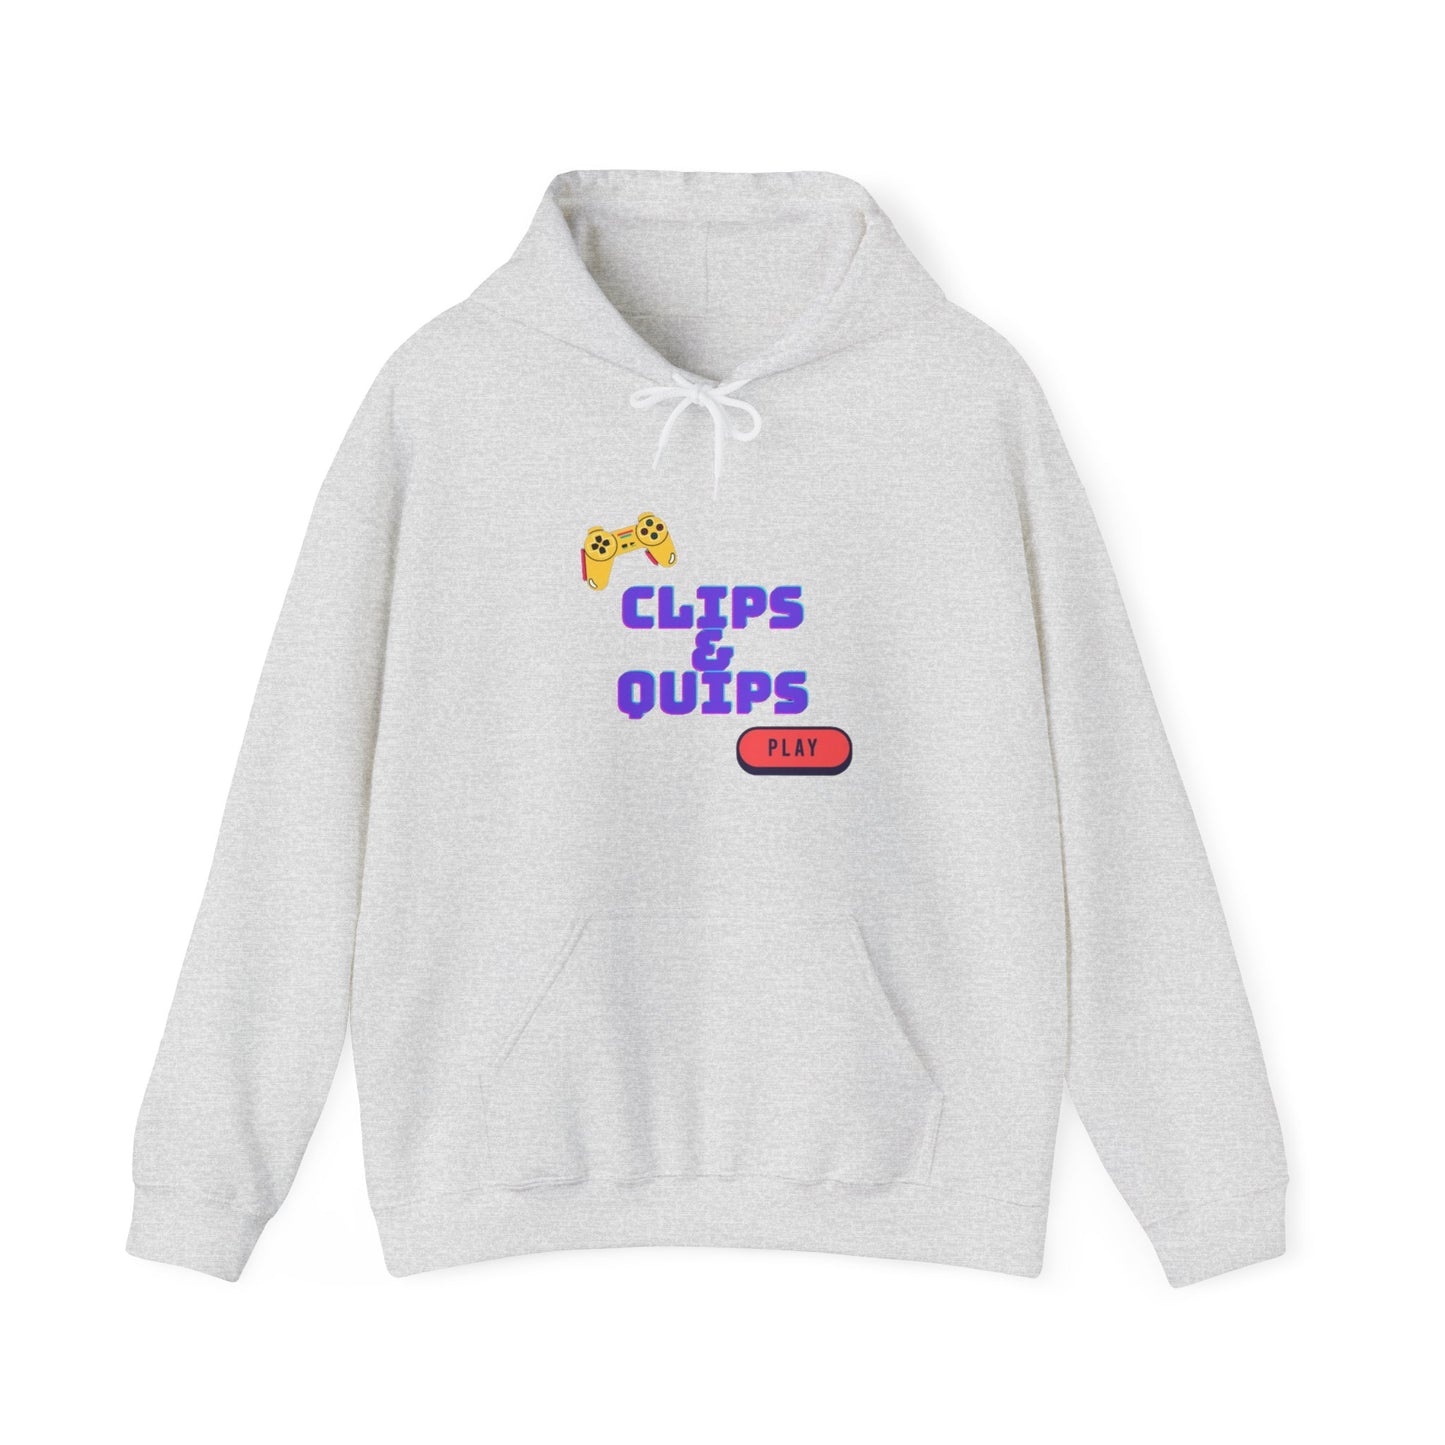 Classic Logo with Get Clipped on the back Hooded Sweatshirt